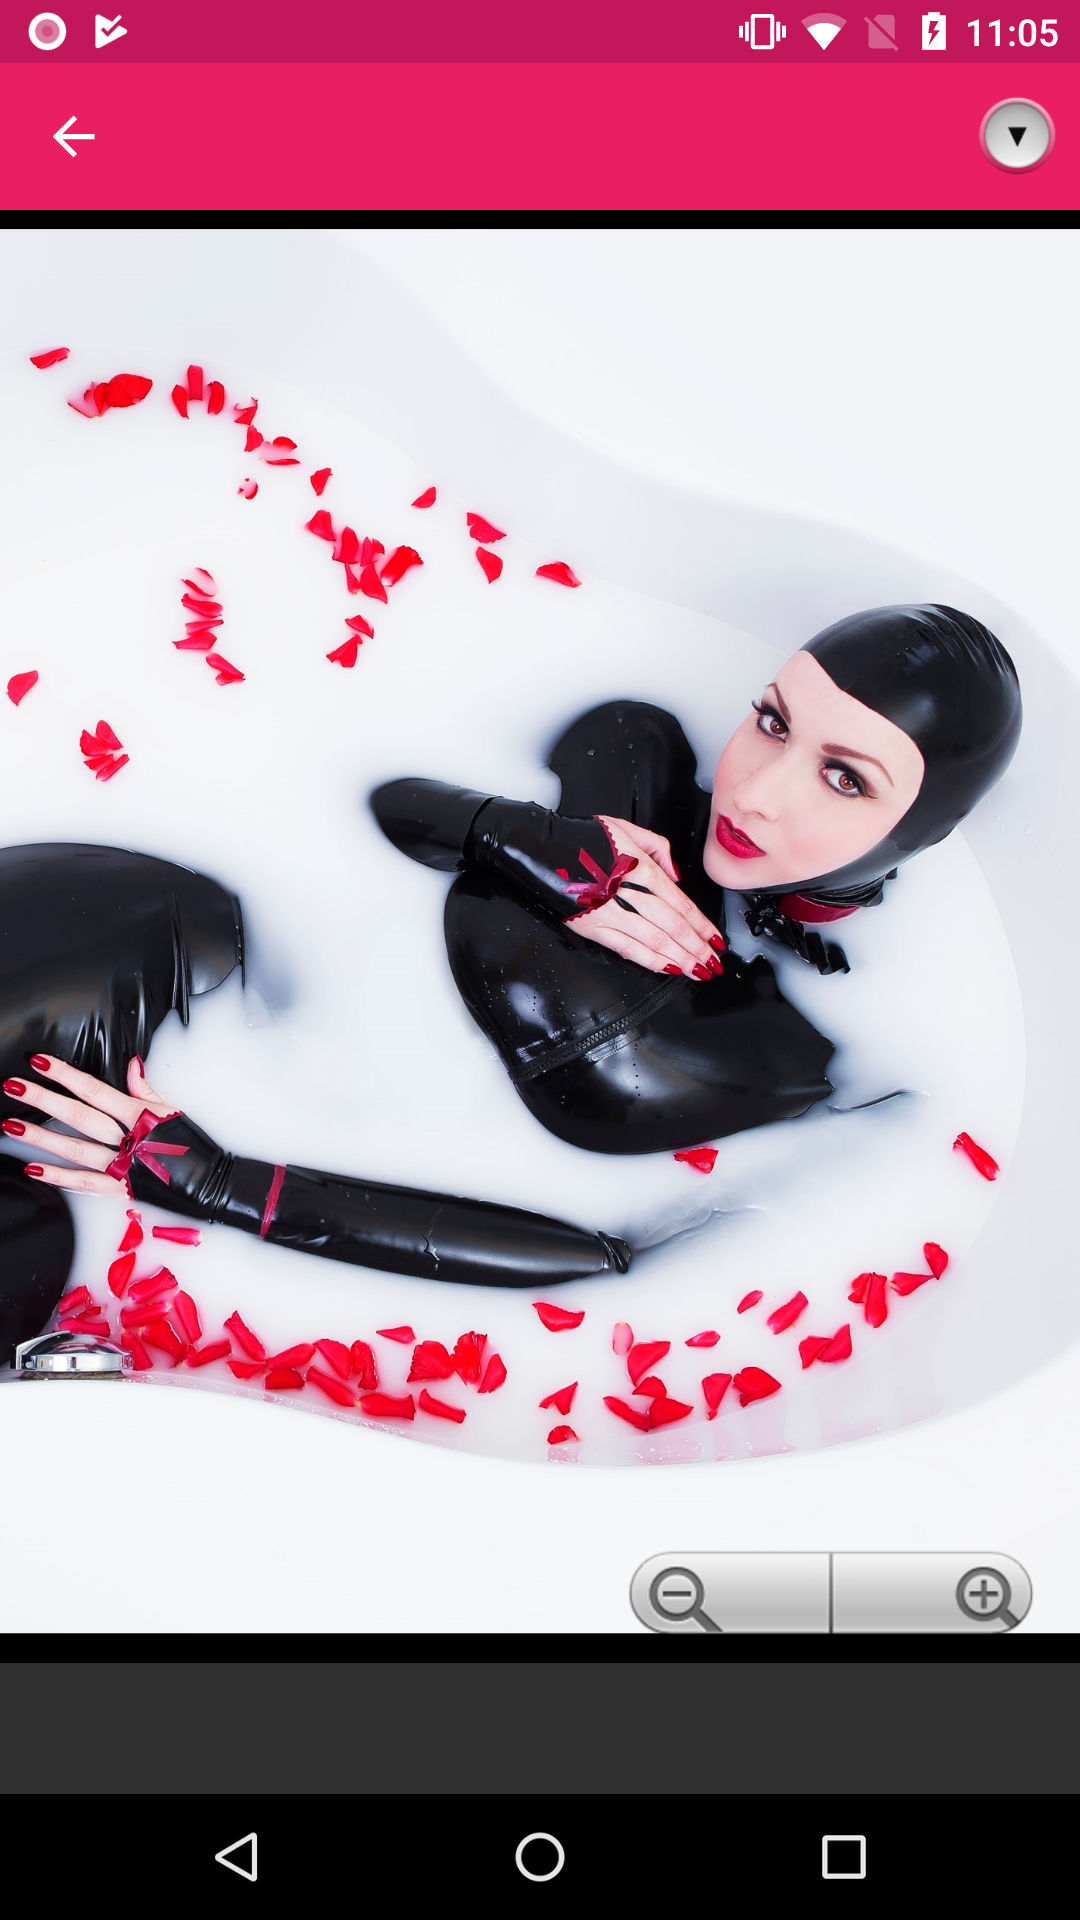 Mistress Wallpapers apk,bdsm,femboy,download,erotic,application,app,domination,wallpapers,wallpaper,femdom,sexy,anime,mistress,pornstar,hentai,porn,mobile,apps,perfect,shemales,latex,pics